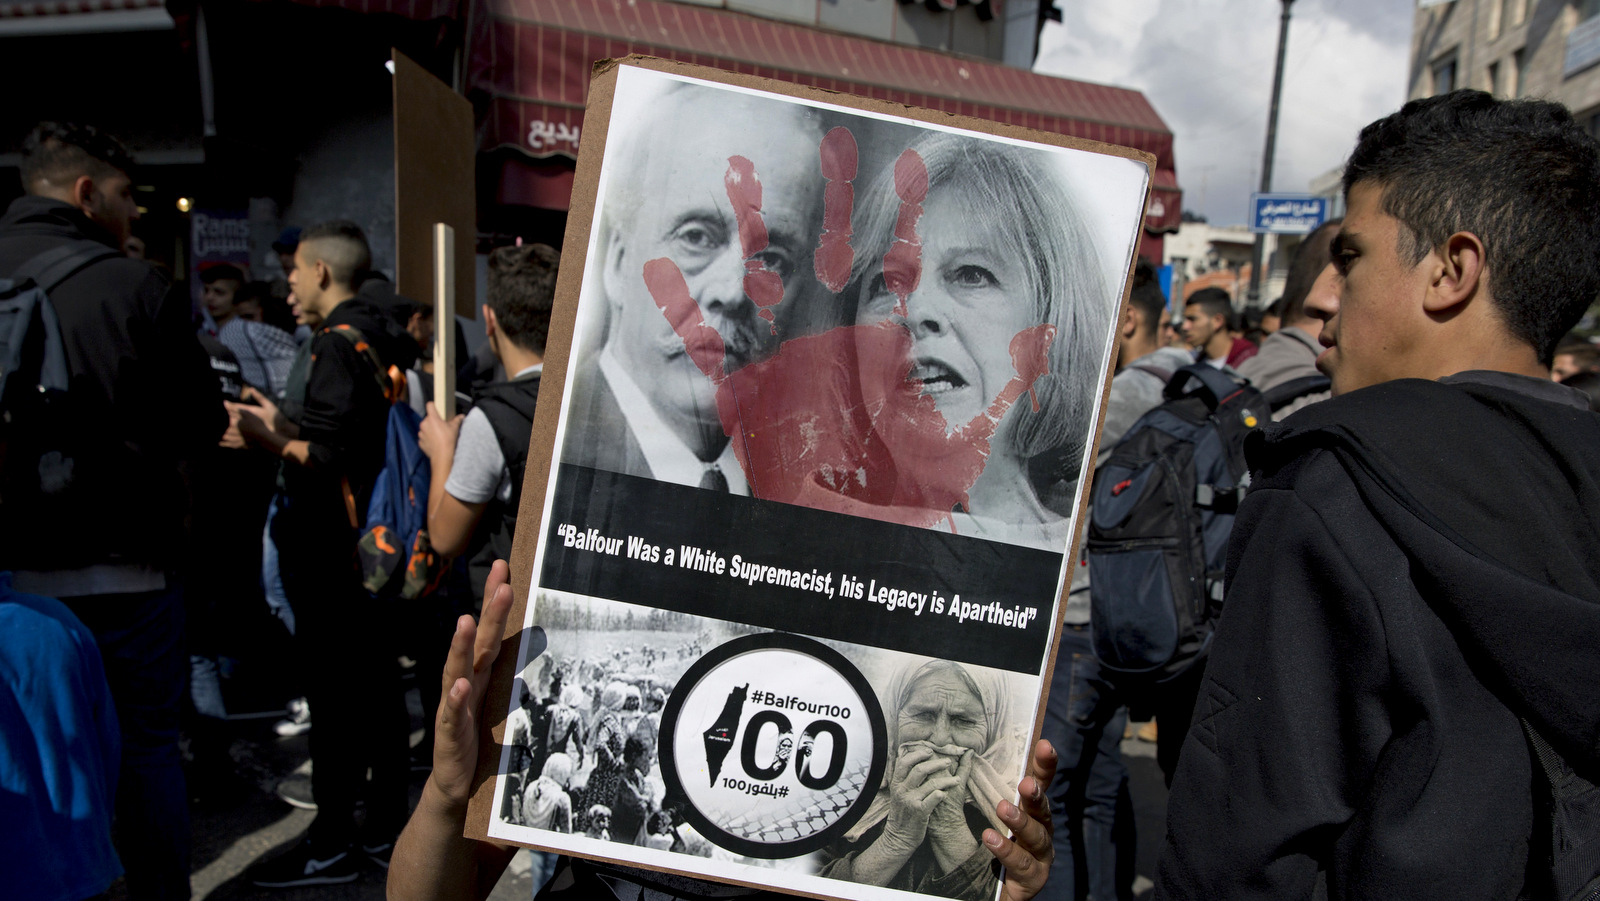 A Palestinian protester carries a poster with a defaced photo of UK Prime Minister Theresa May, and Arthur Balfour, on the 100th anniversary of the Balfour Declaration, in Ramallah, Thursday, Nov. 2, 2017. Thousands of Palestinians have taken to the streets in protest across the West Bank marking a century since the Balfour Declaration, Britain's promise to Zionists to create a Jewish home in what is now Israel. (AP Photo/Nasser Nasser)